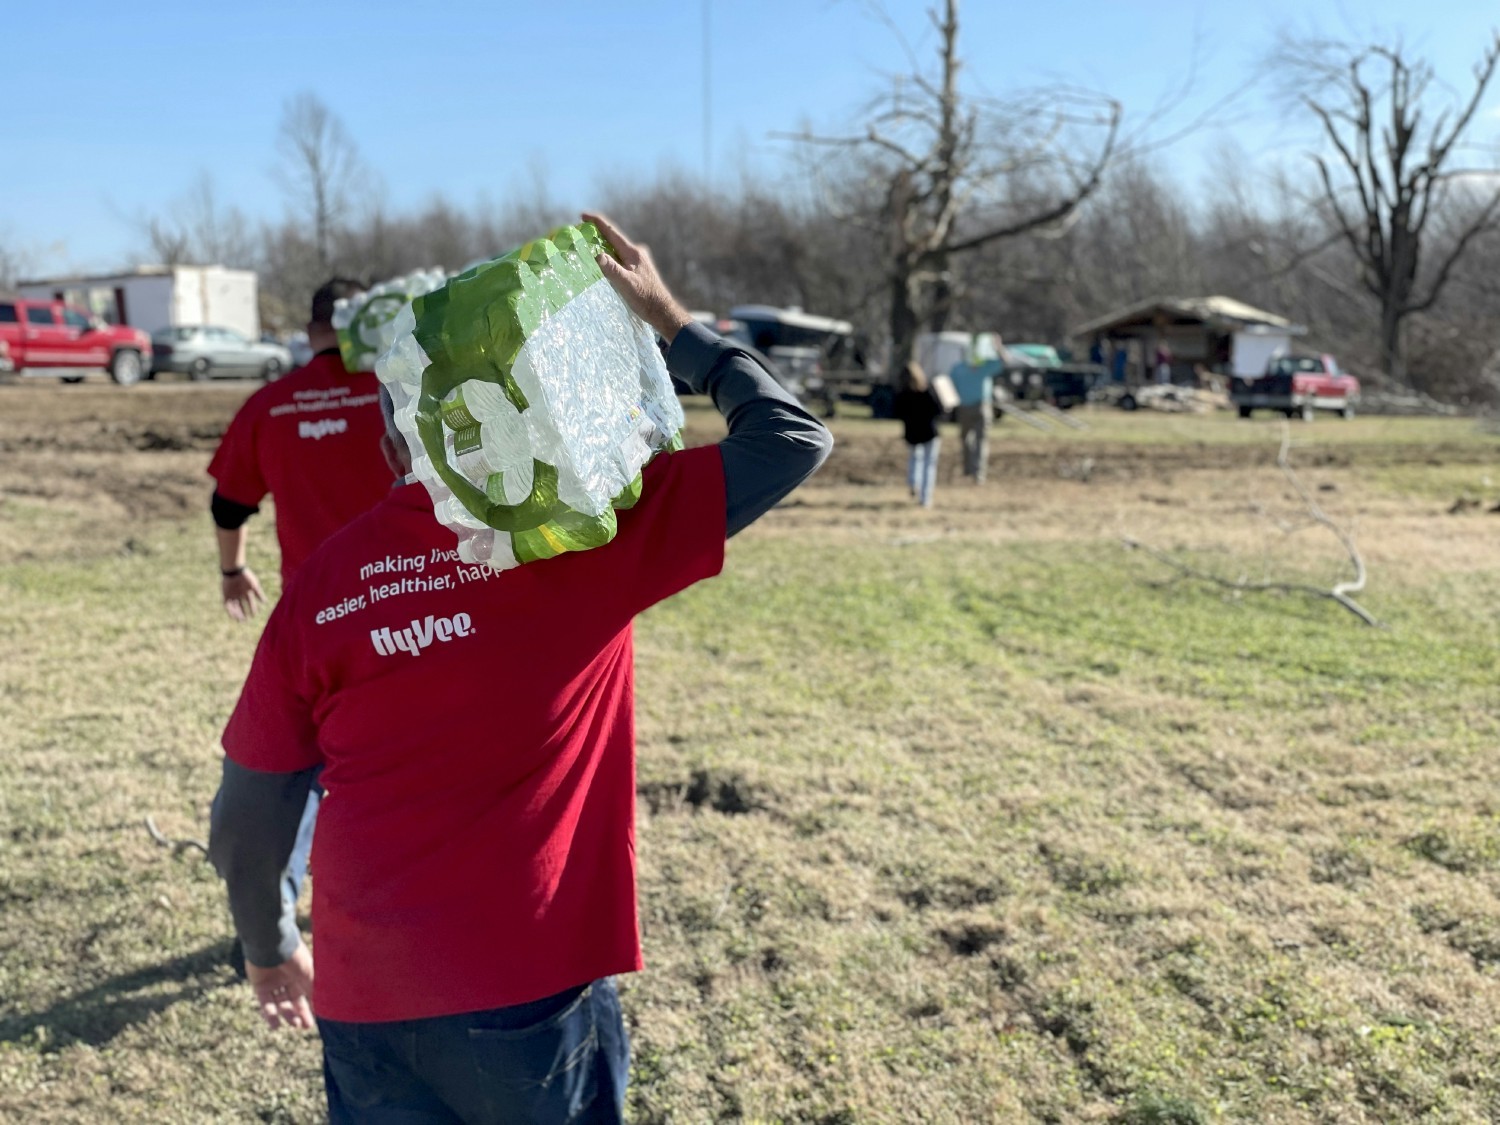 Hy-Vee employees delivering supplies to residents of Mayfield, Kentucky, after tornadoes hit the community.